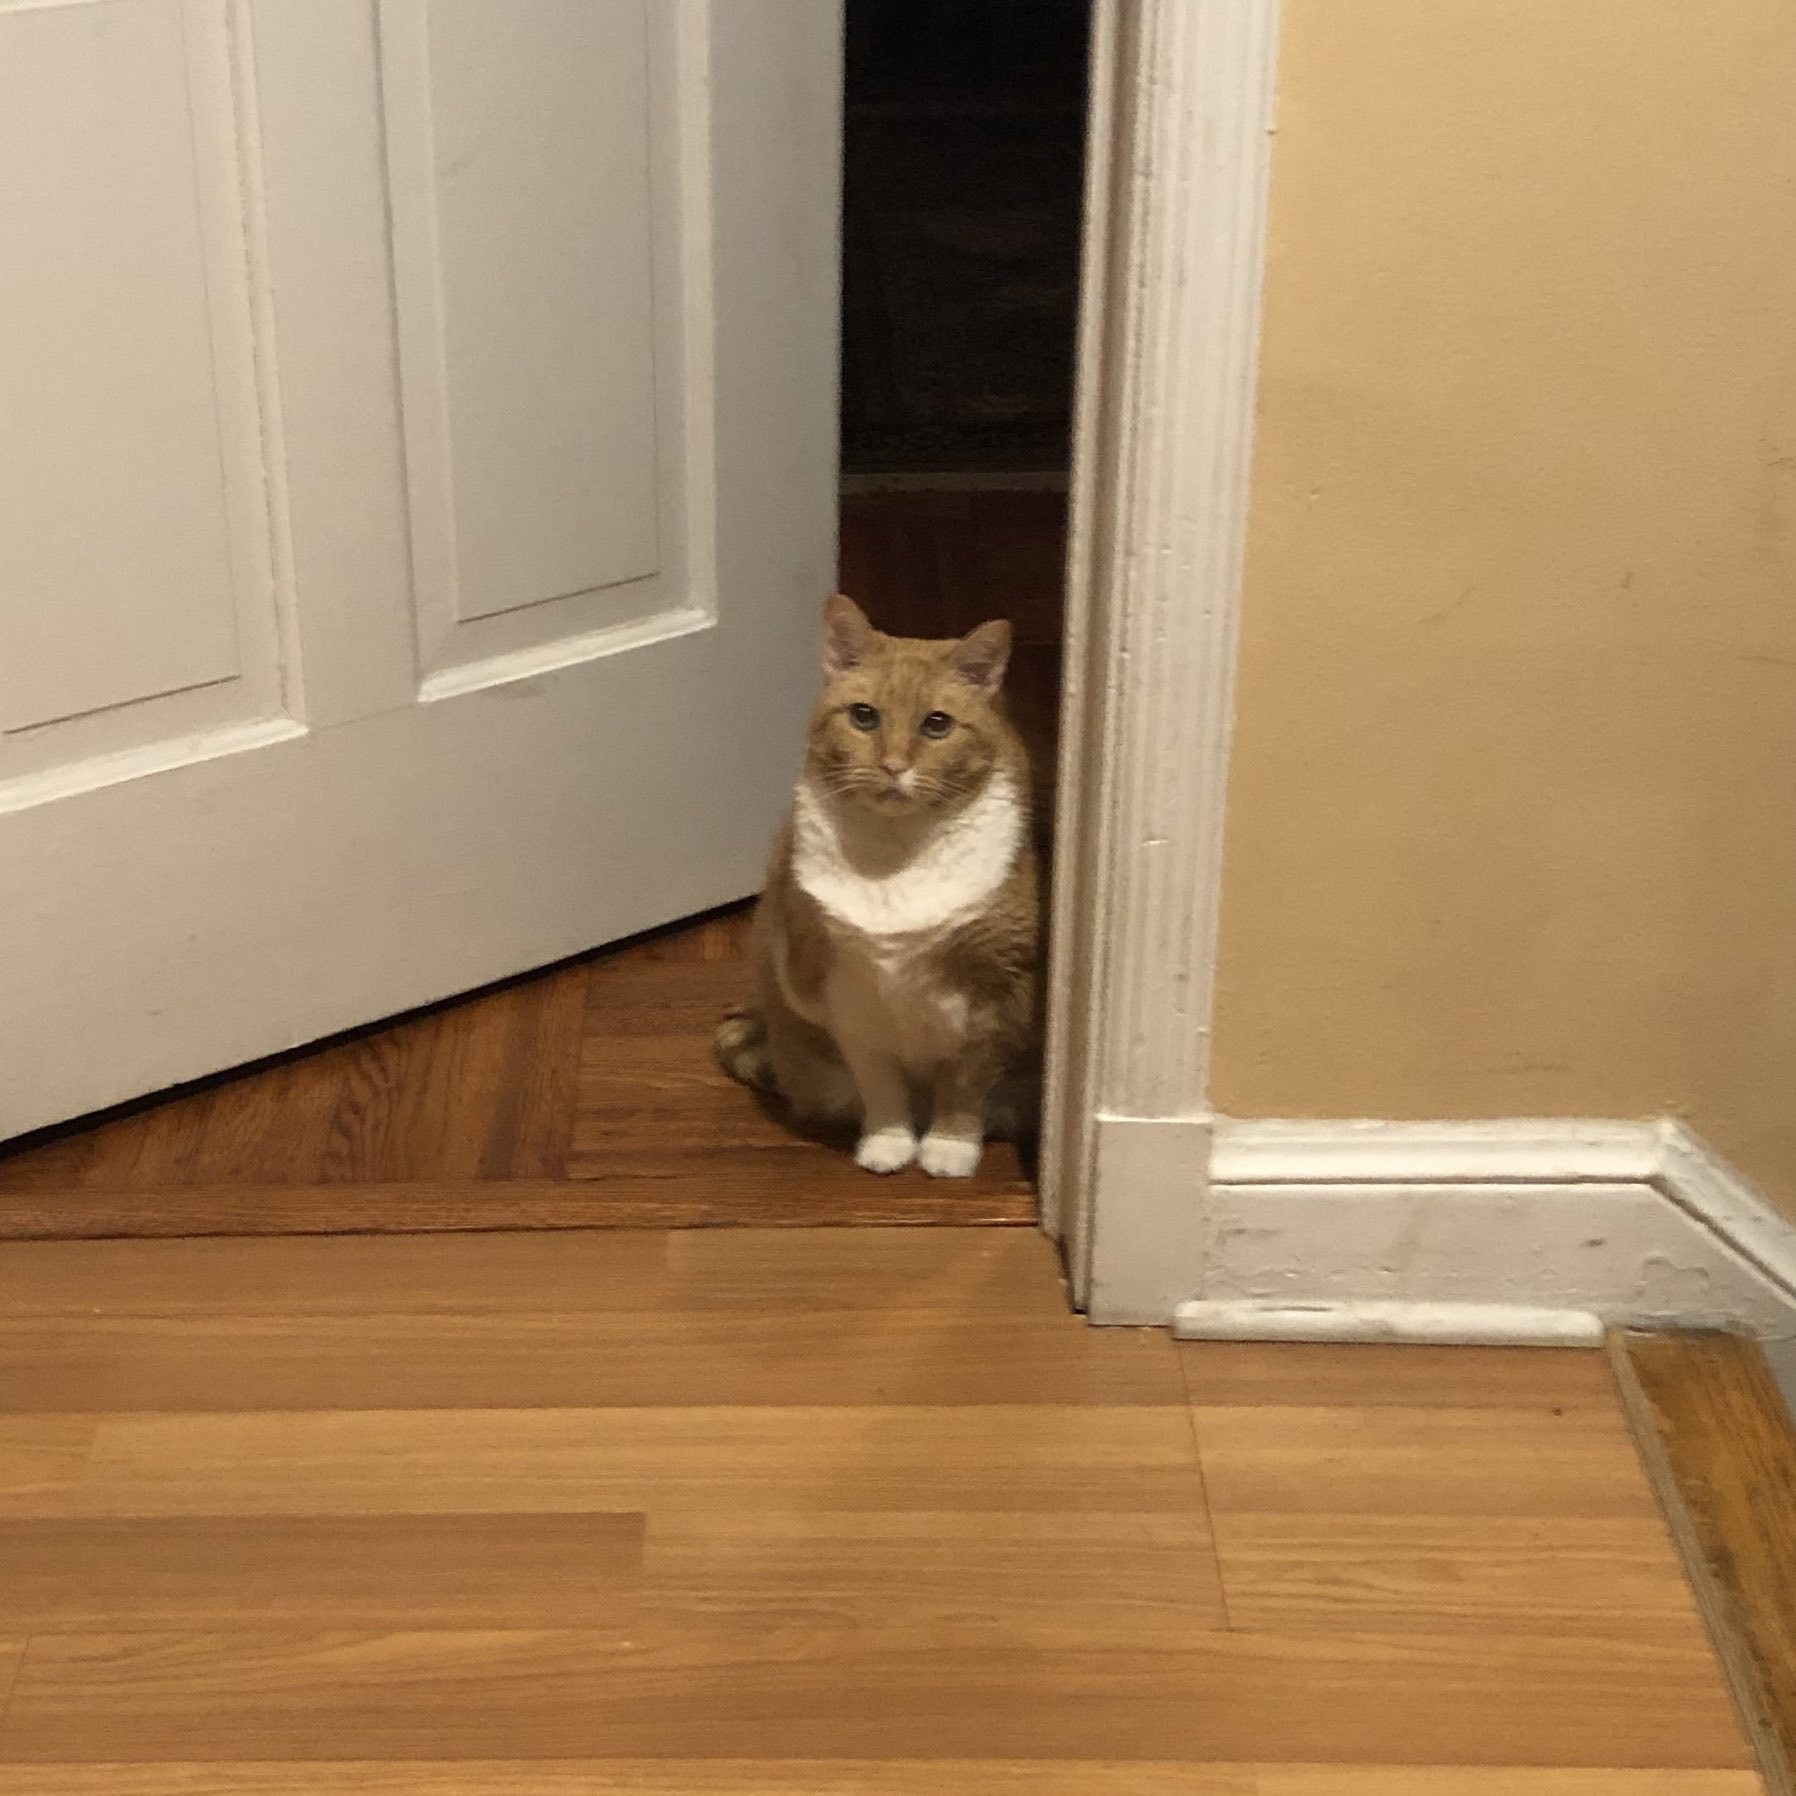 Tabby cat sitting in doorway, looking at the camera.